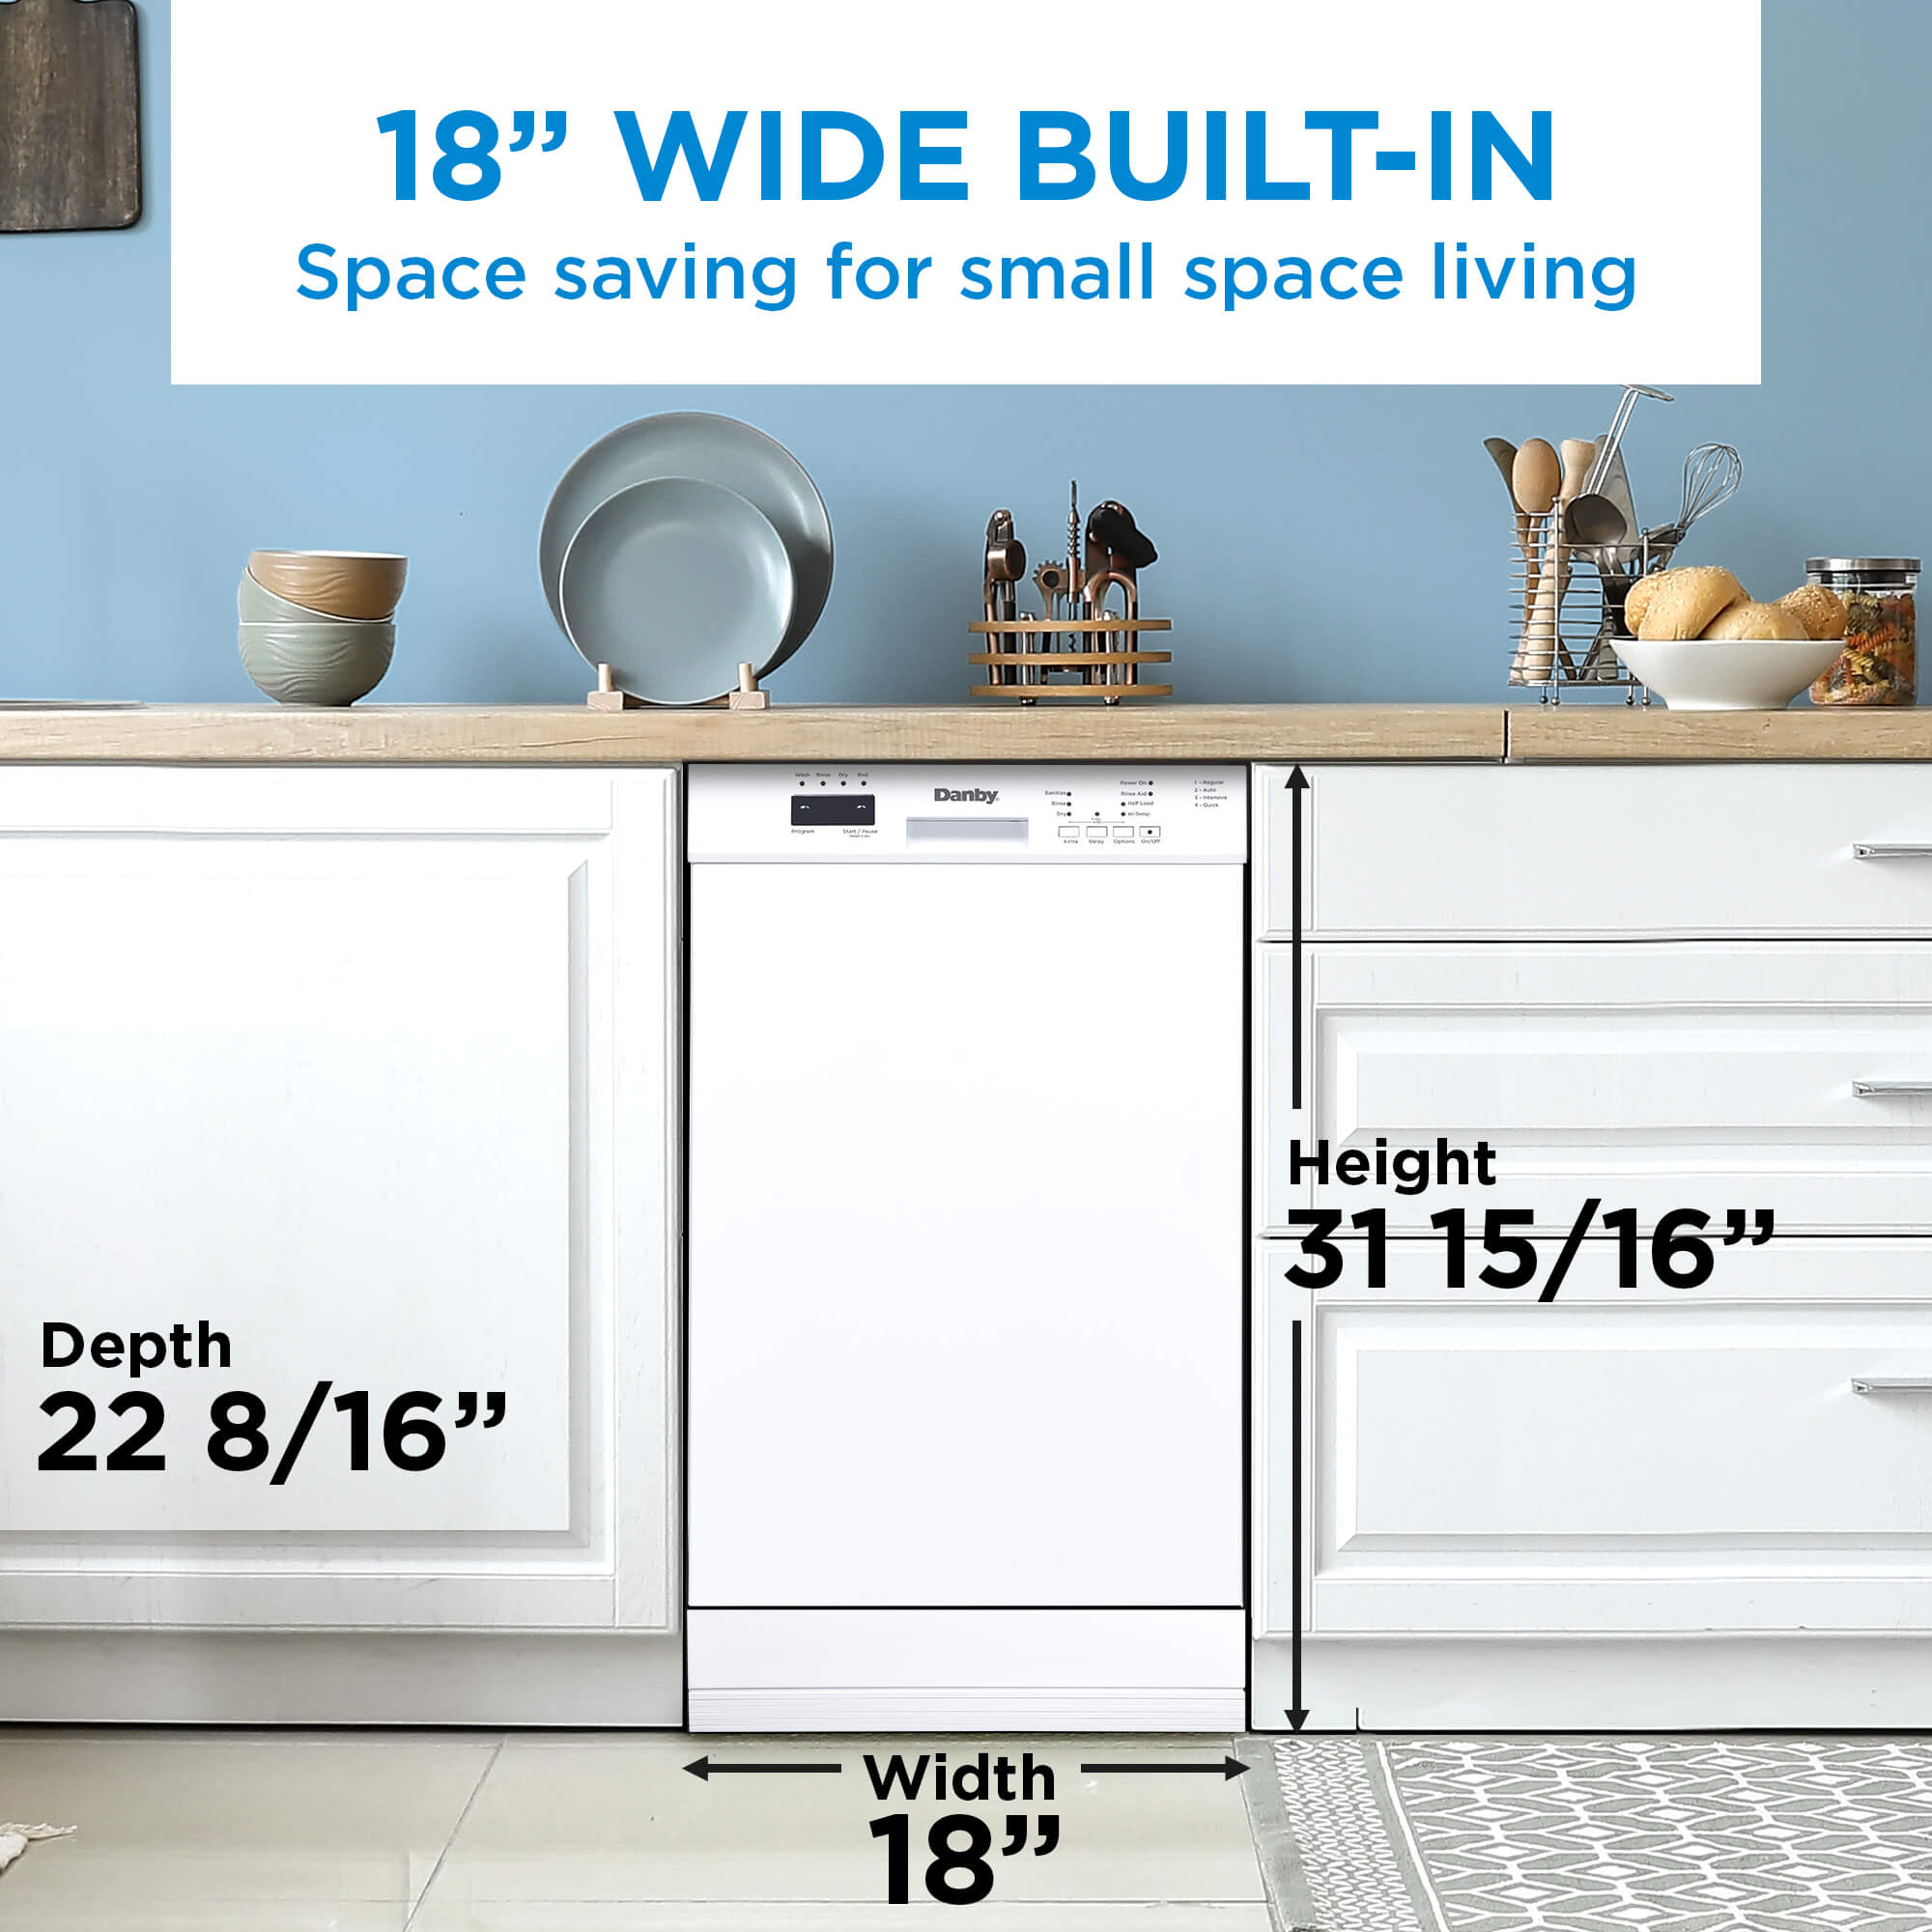 Danby 18" Wide Built-in Dishwasher in White